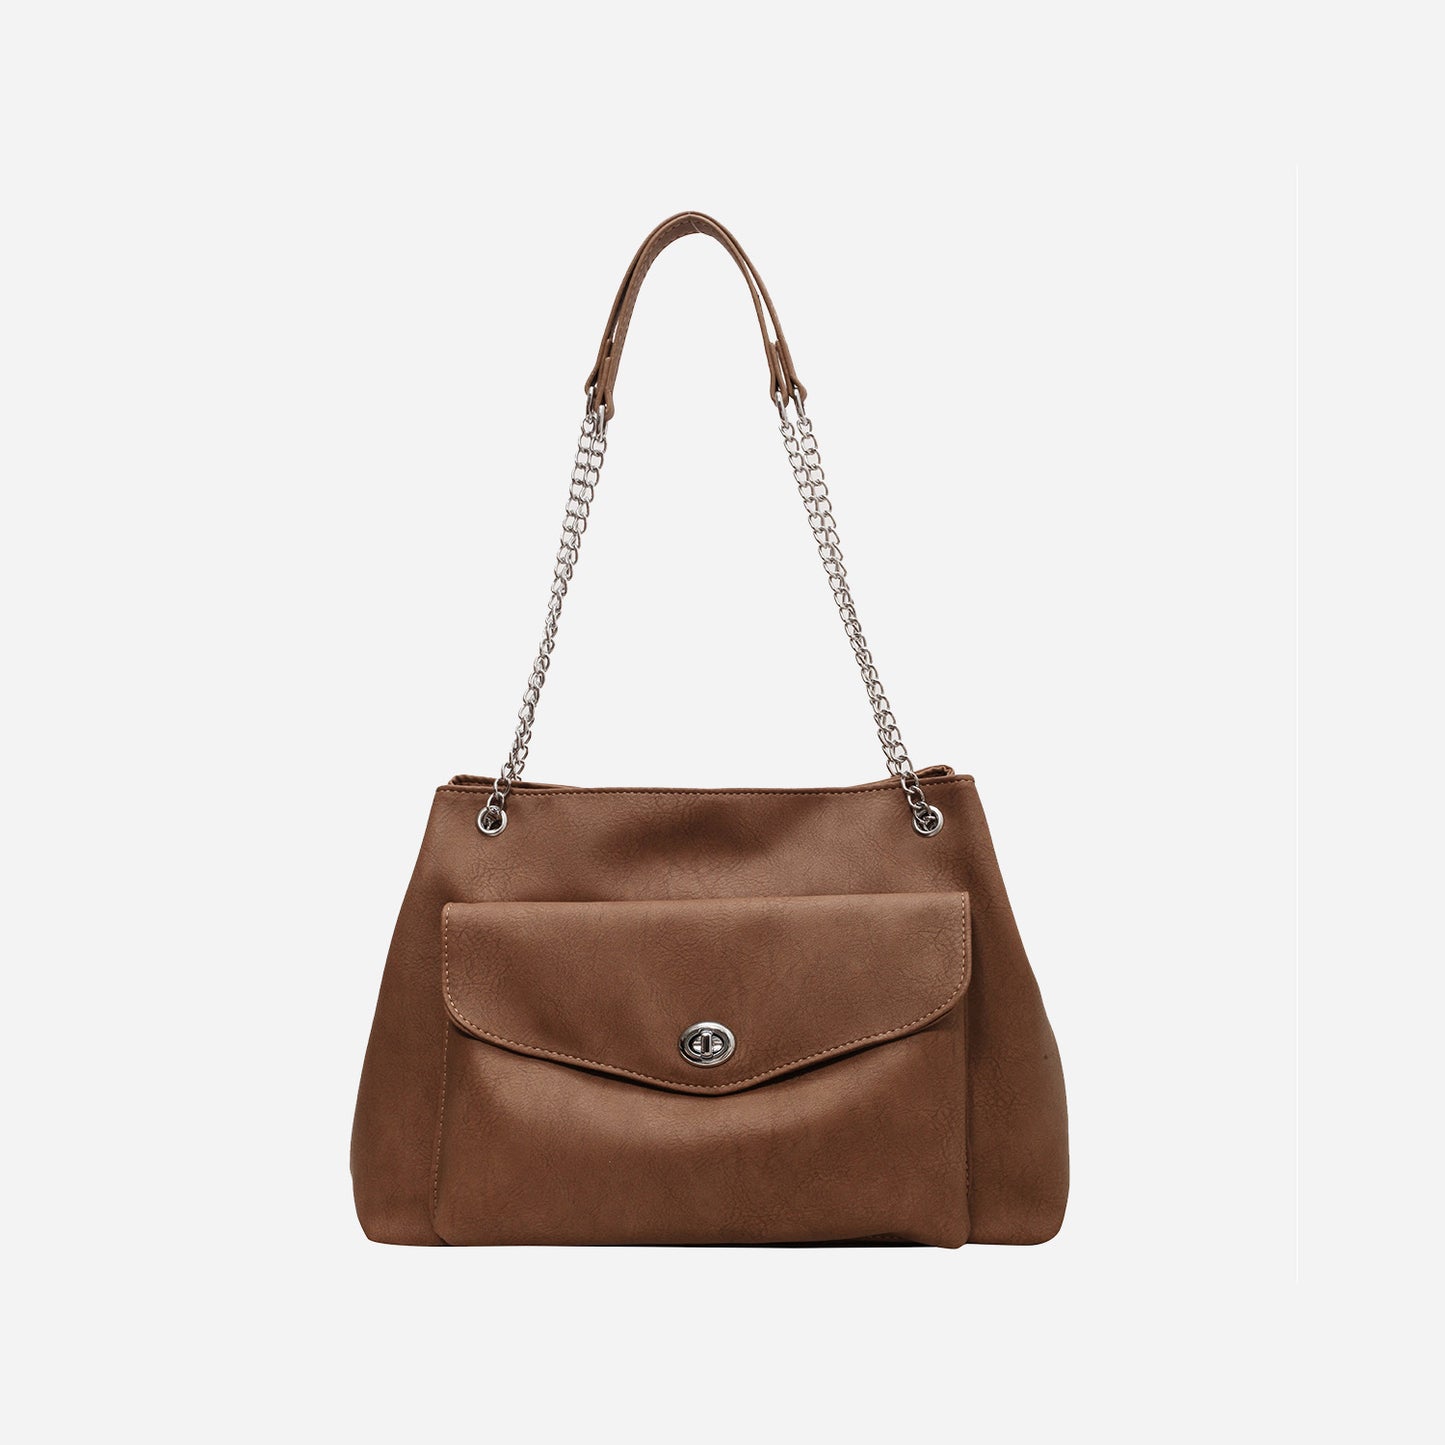 PU Leather Shoulder Bag Coffee Brown One Size